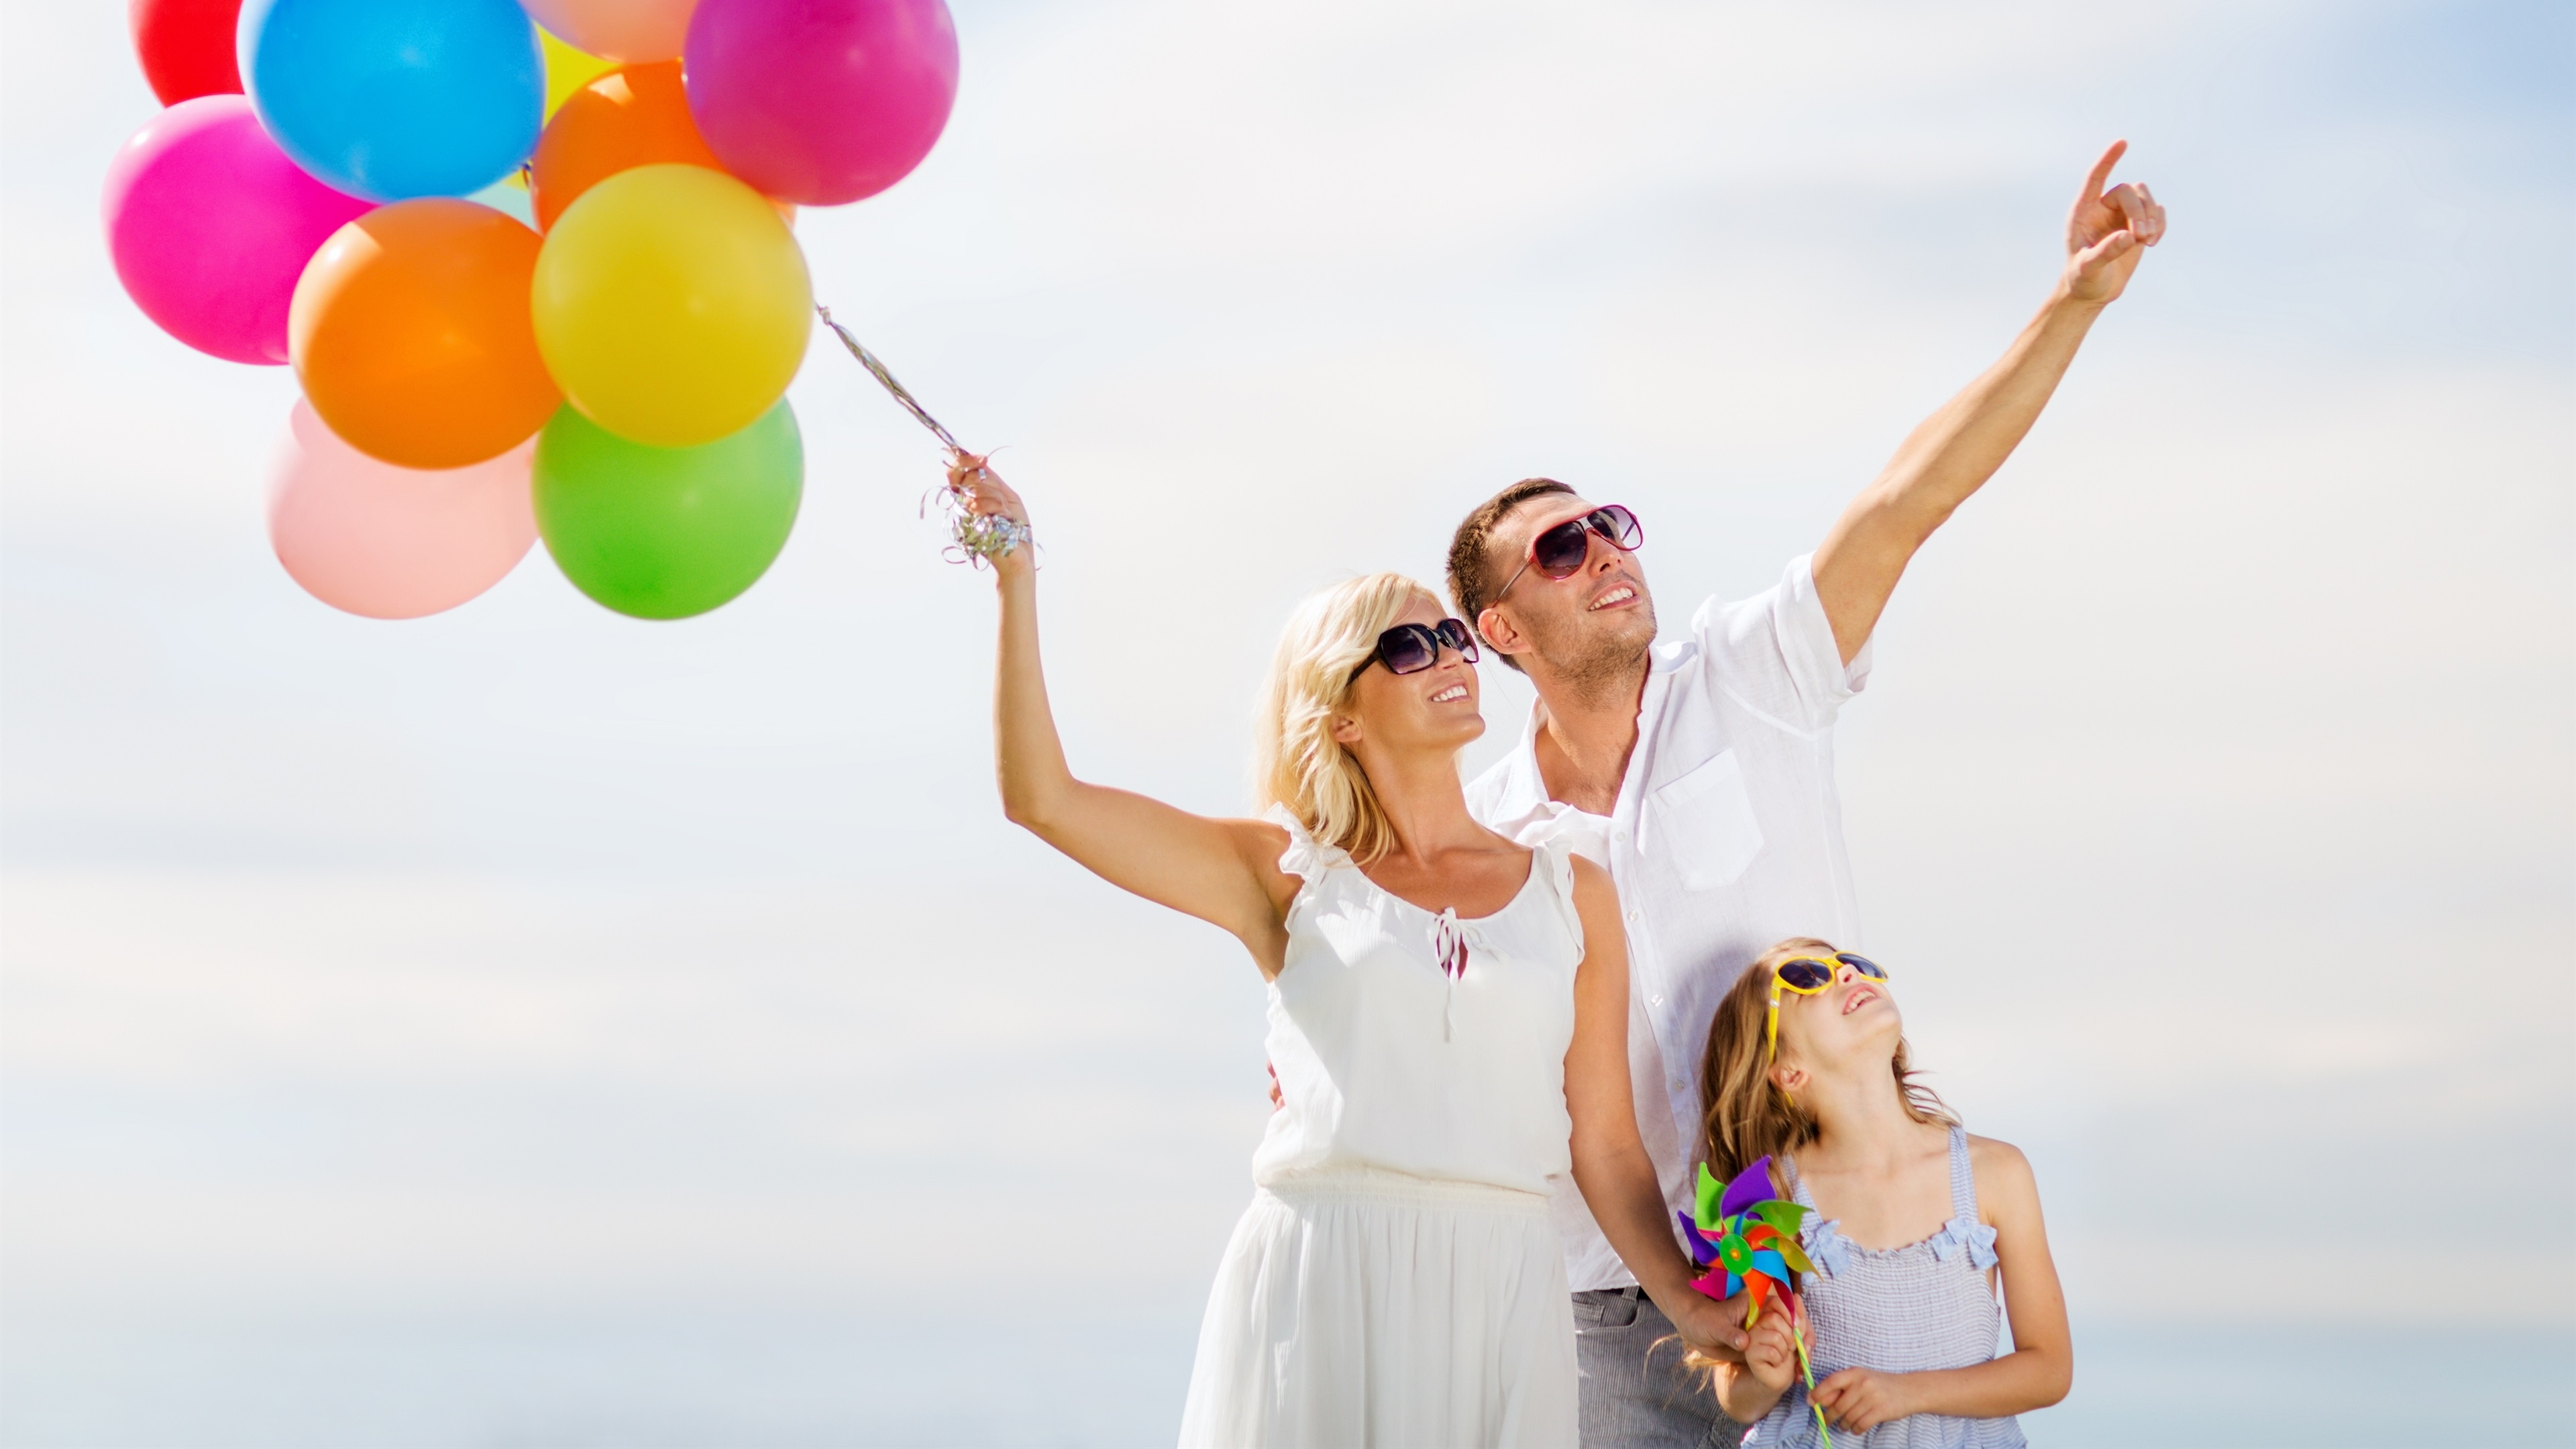 Family Foto With Balloons - HD Wallpaper 